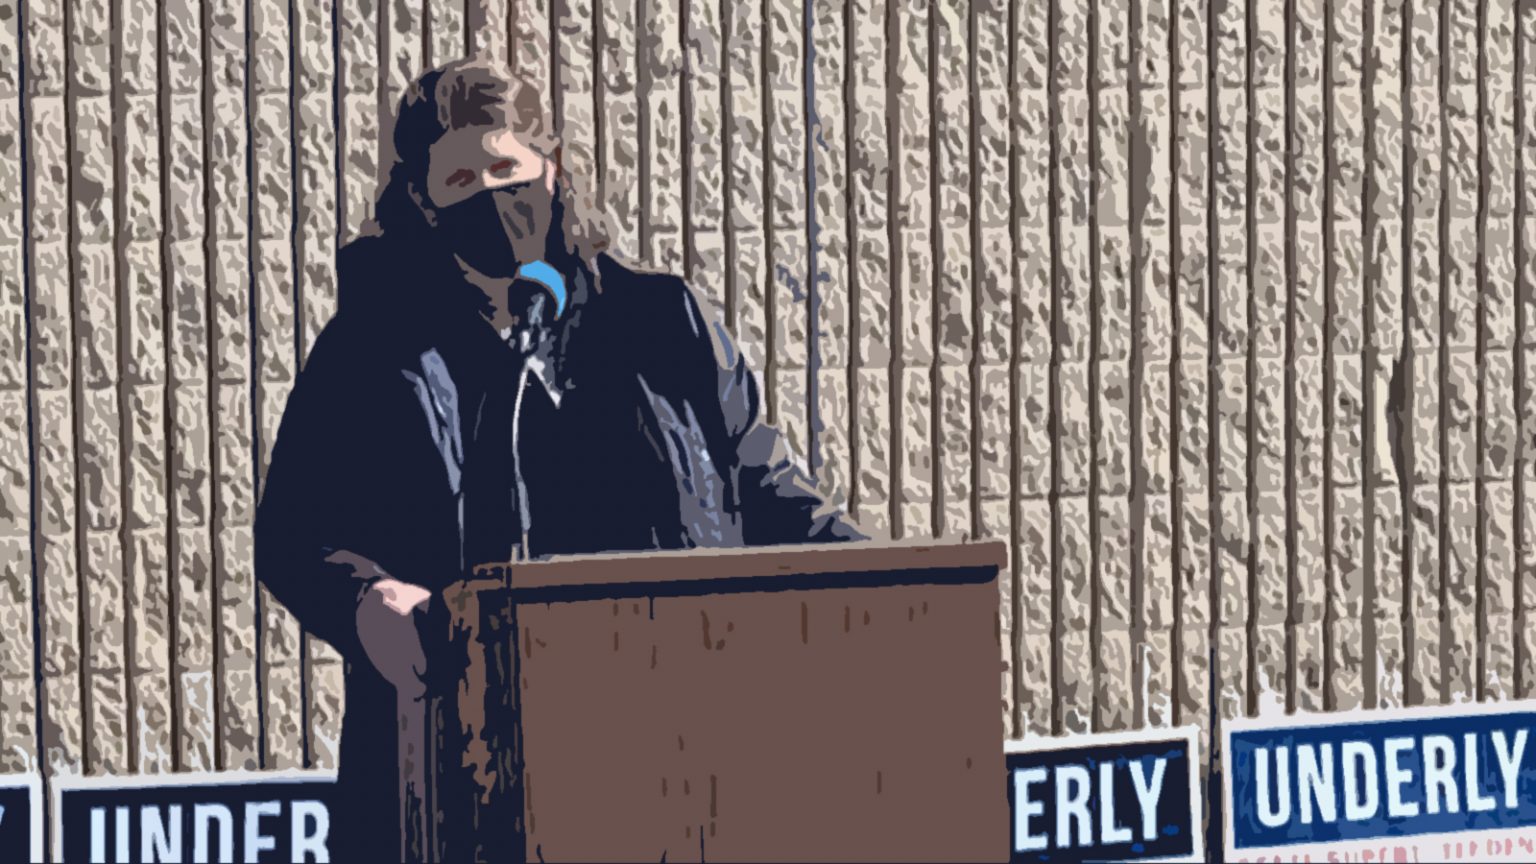 Poster-style illustration of Jill Underly speaking at podium